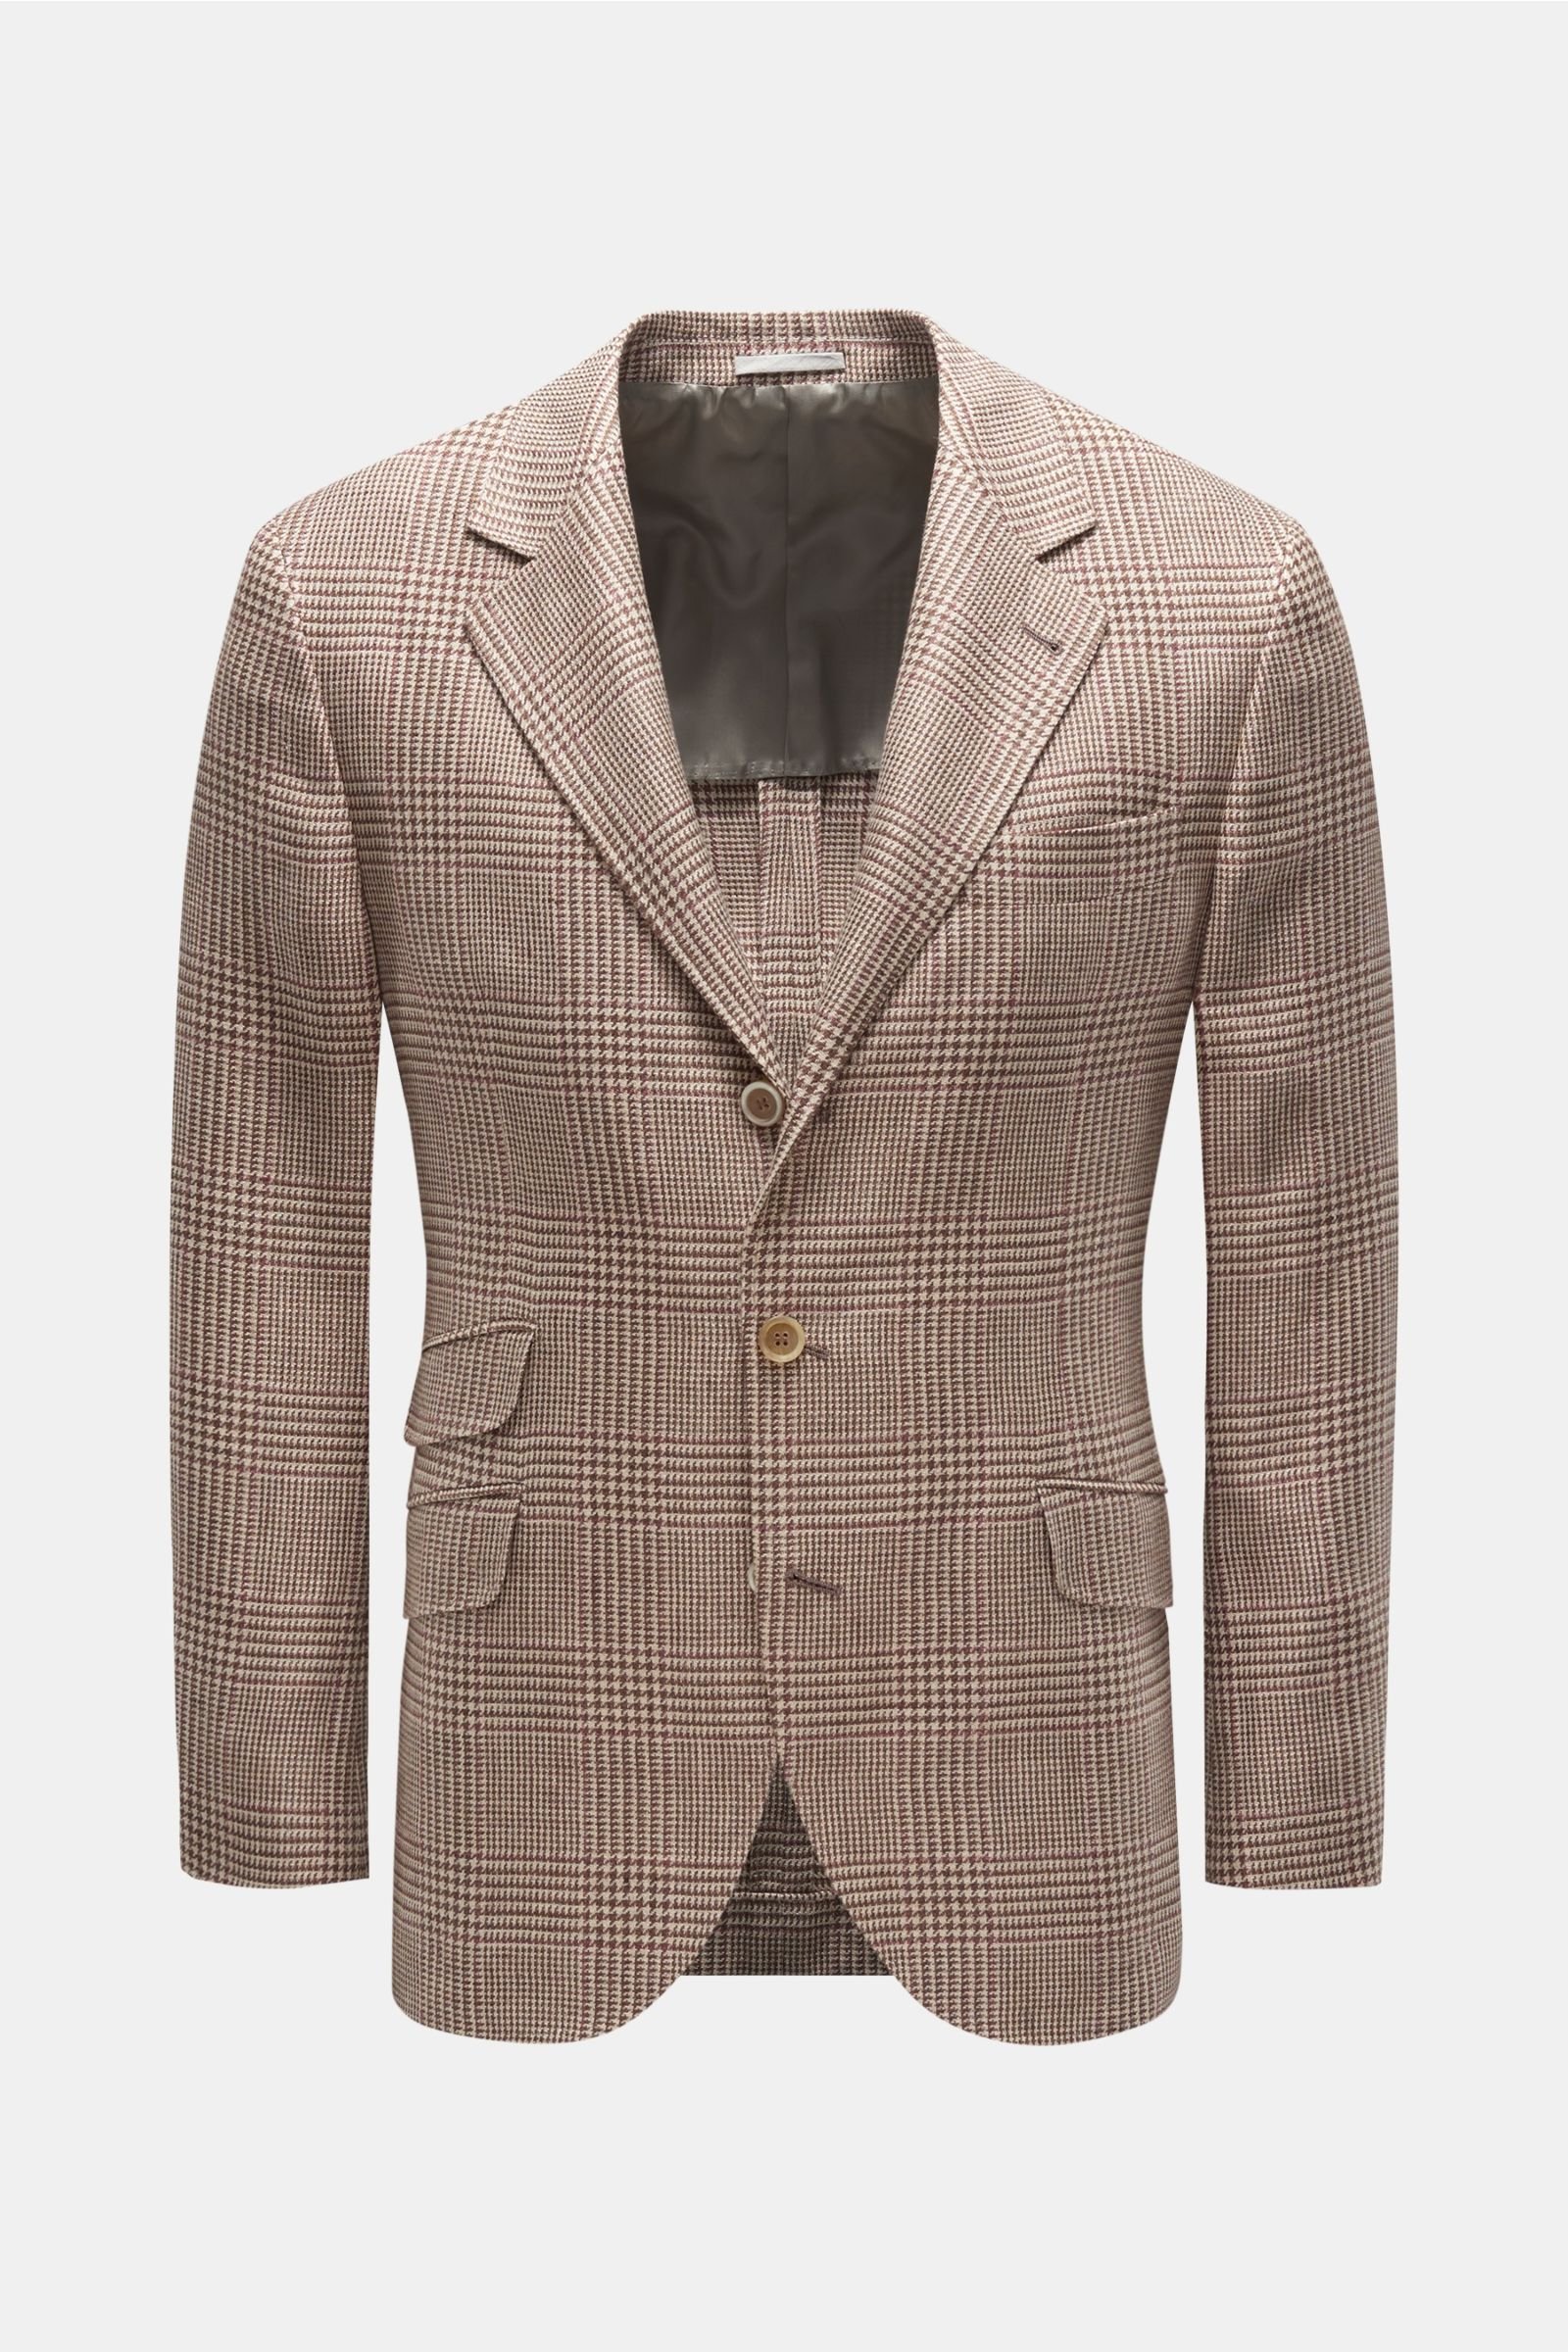 Smart-casual jacket beige/brown checked